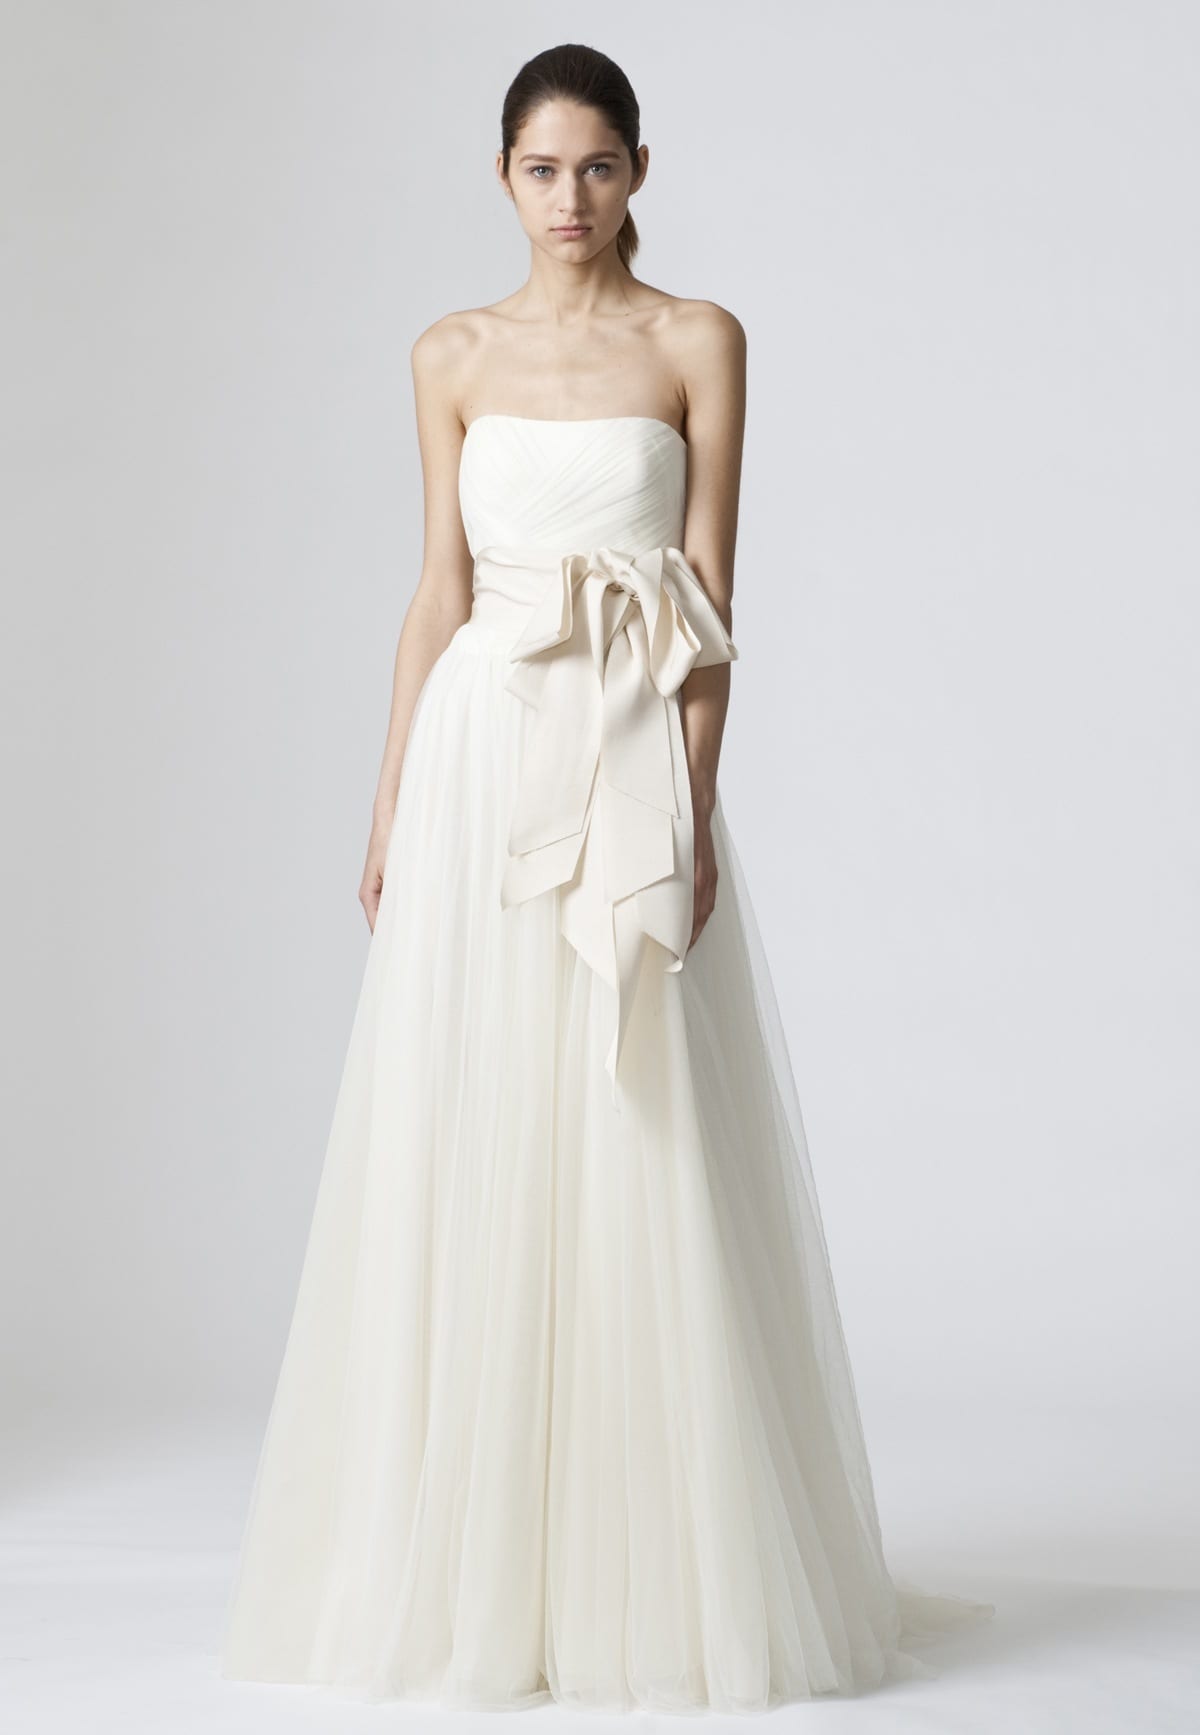 22 Elegant Wedding Gowns To Make Your Big Day Special